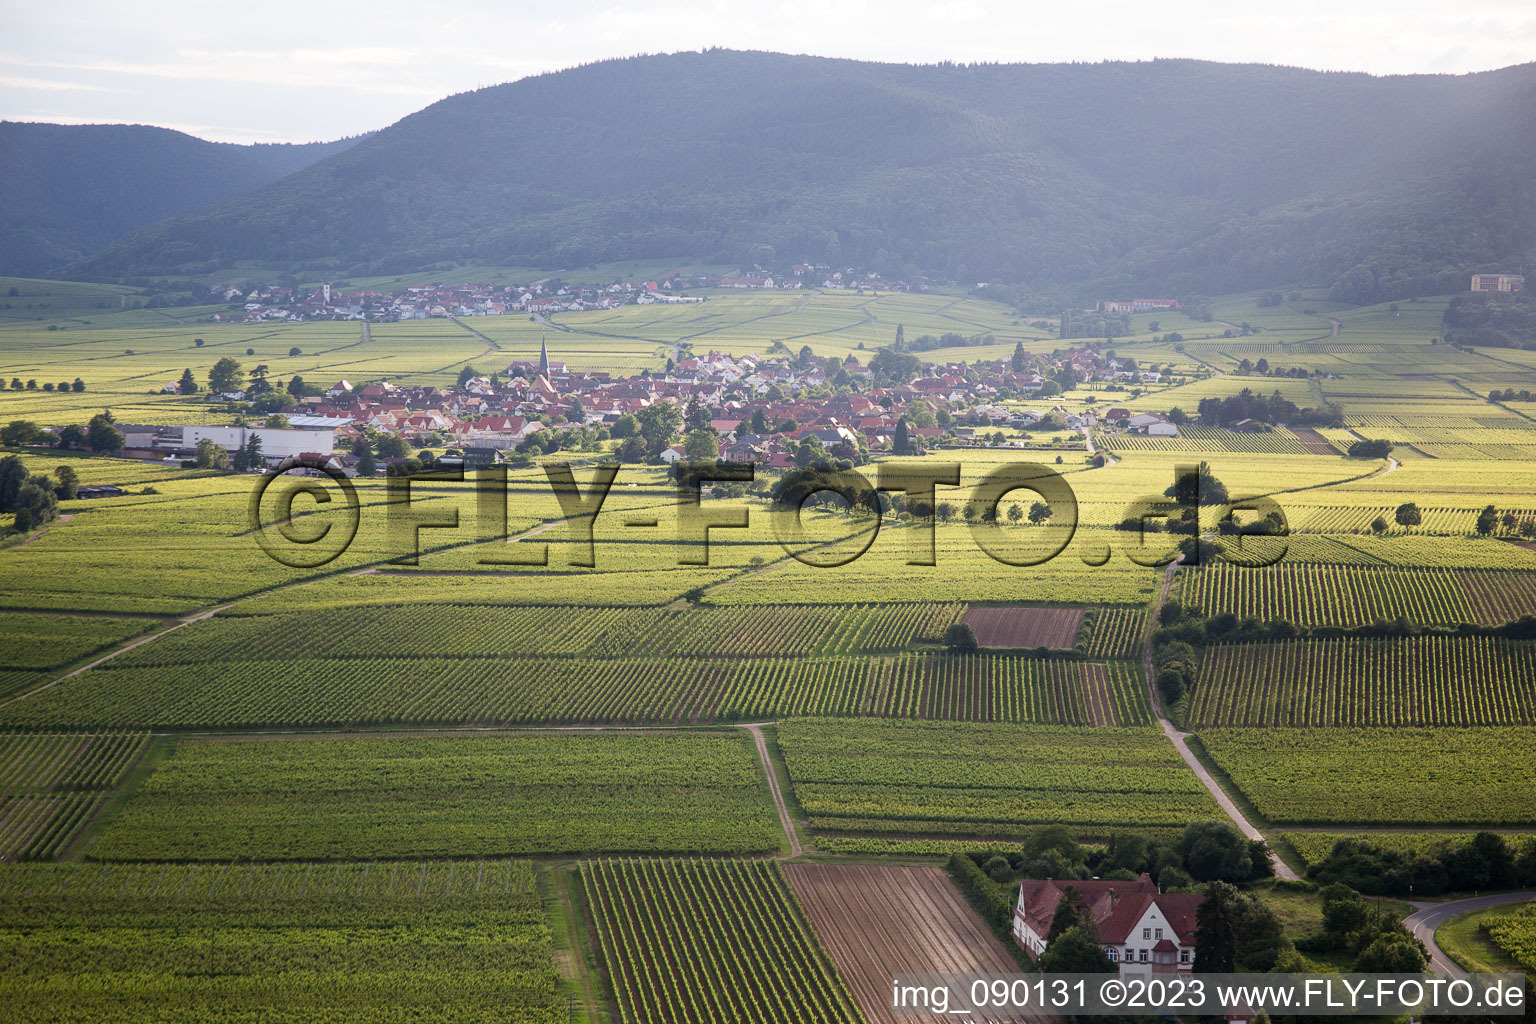 Aerial photograpy of Rhodt unter Rietburg in the state Rhineland-Palatinate, Germany